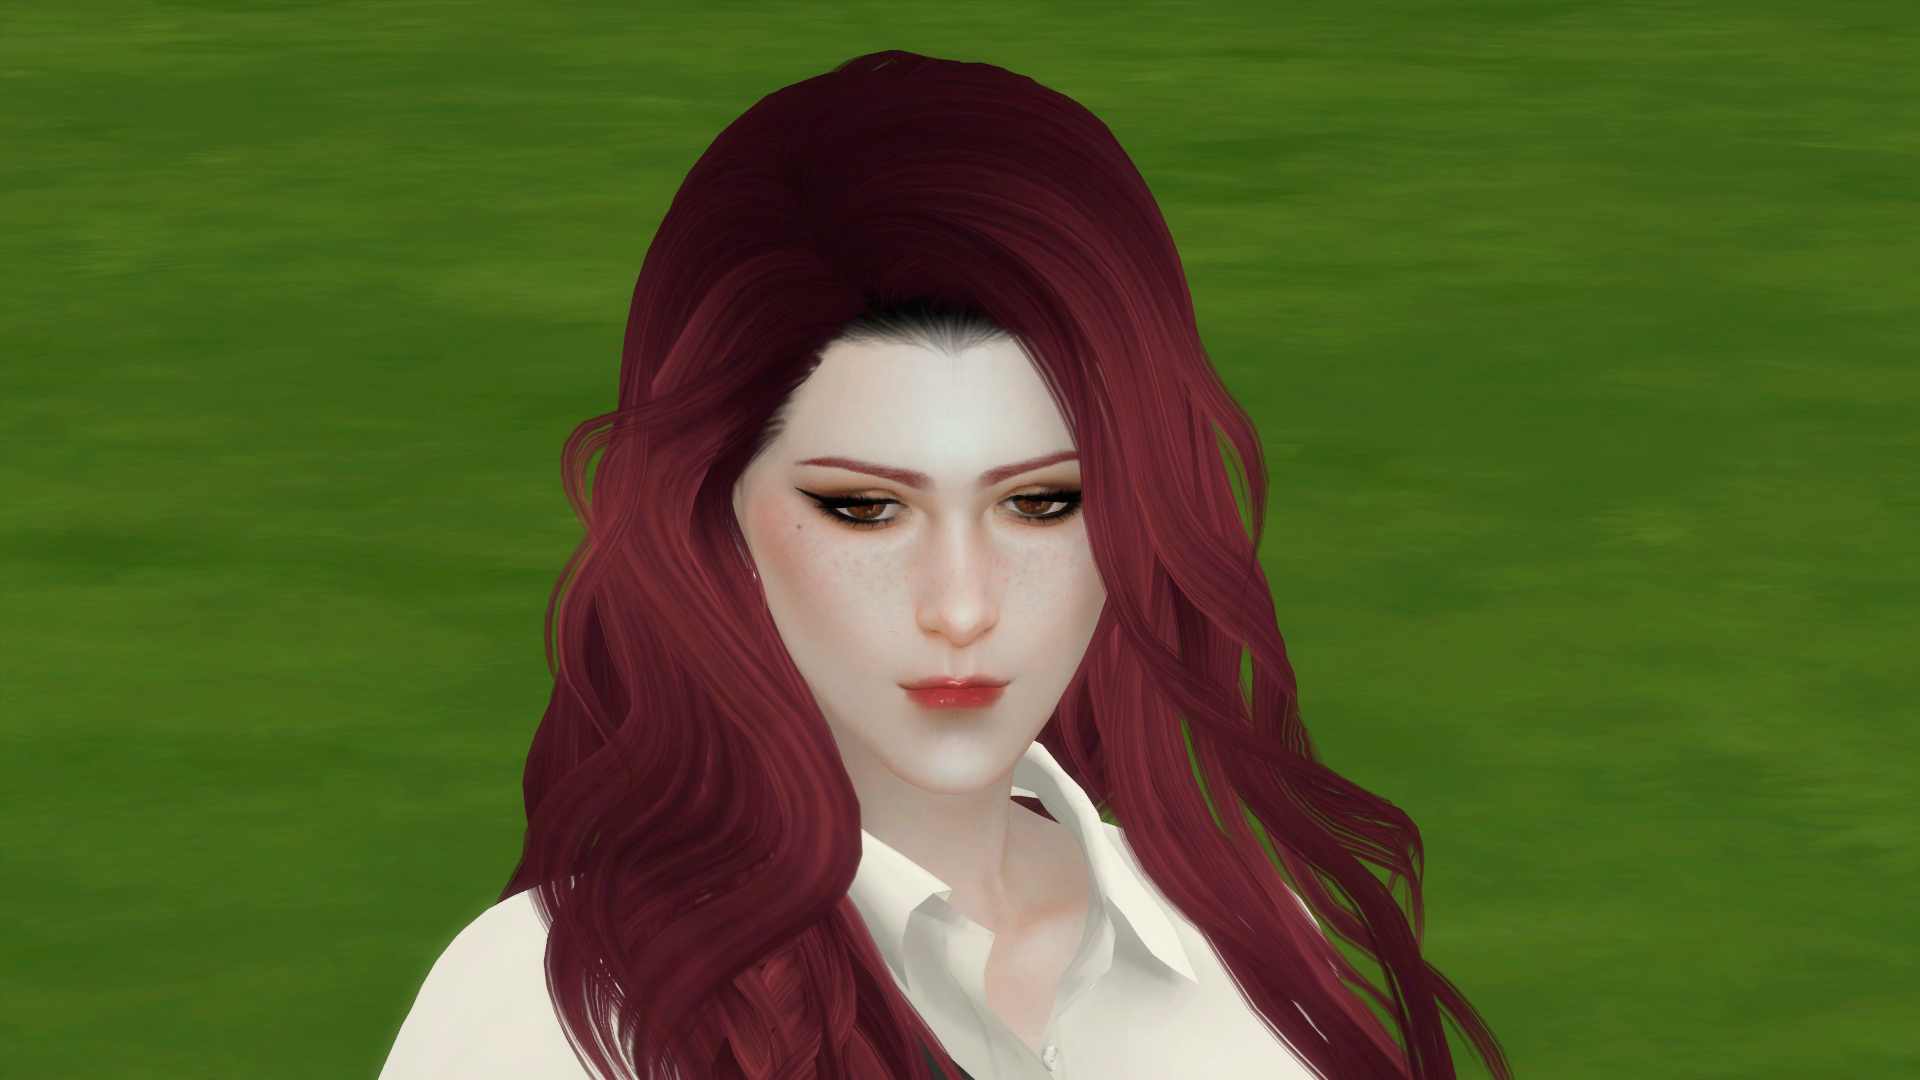 1789587582_TheSims42_14_202110_56_26AM.png.b376ef69580335485d4b31f3dd6e0b64.png